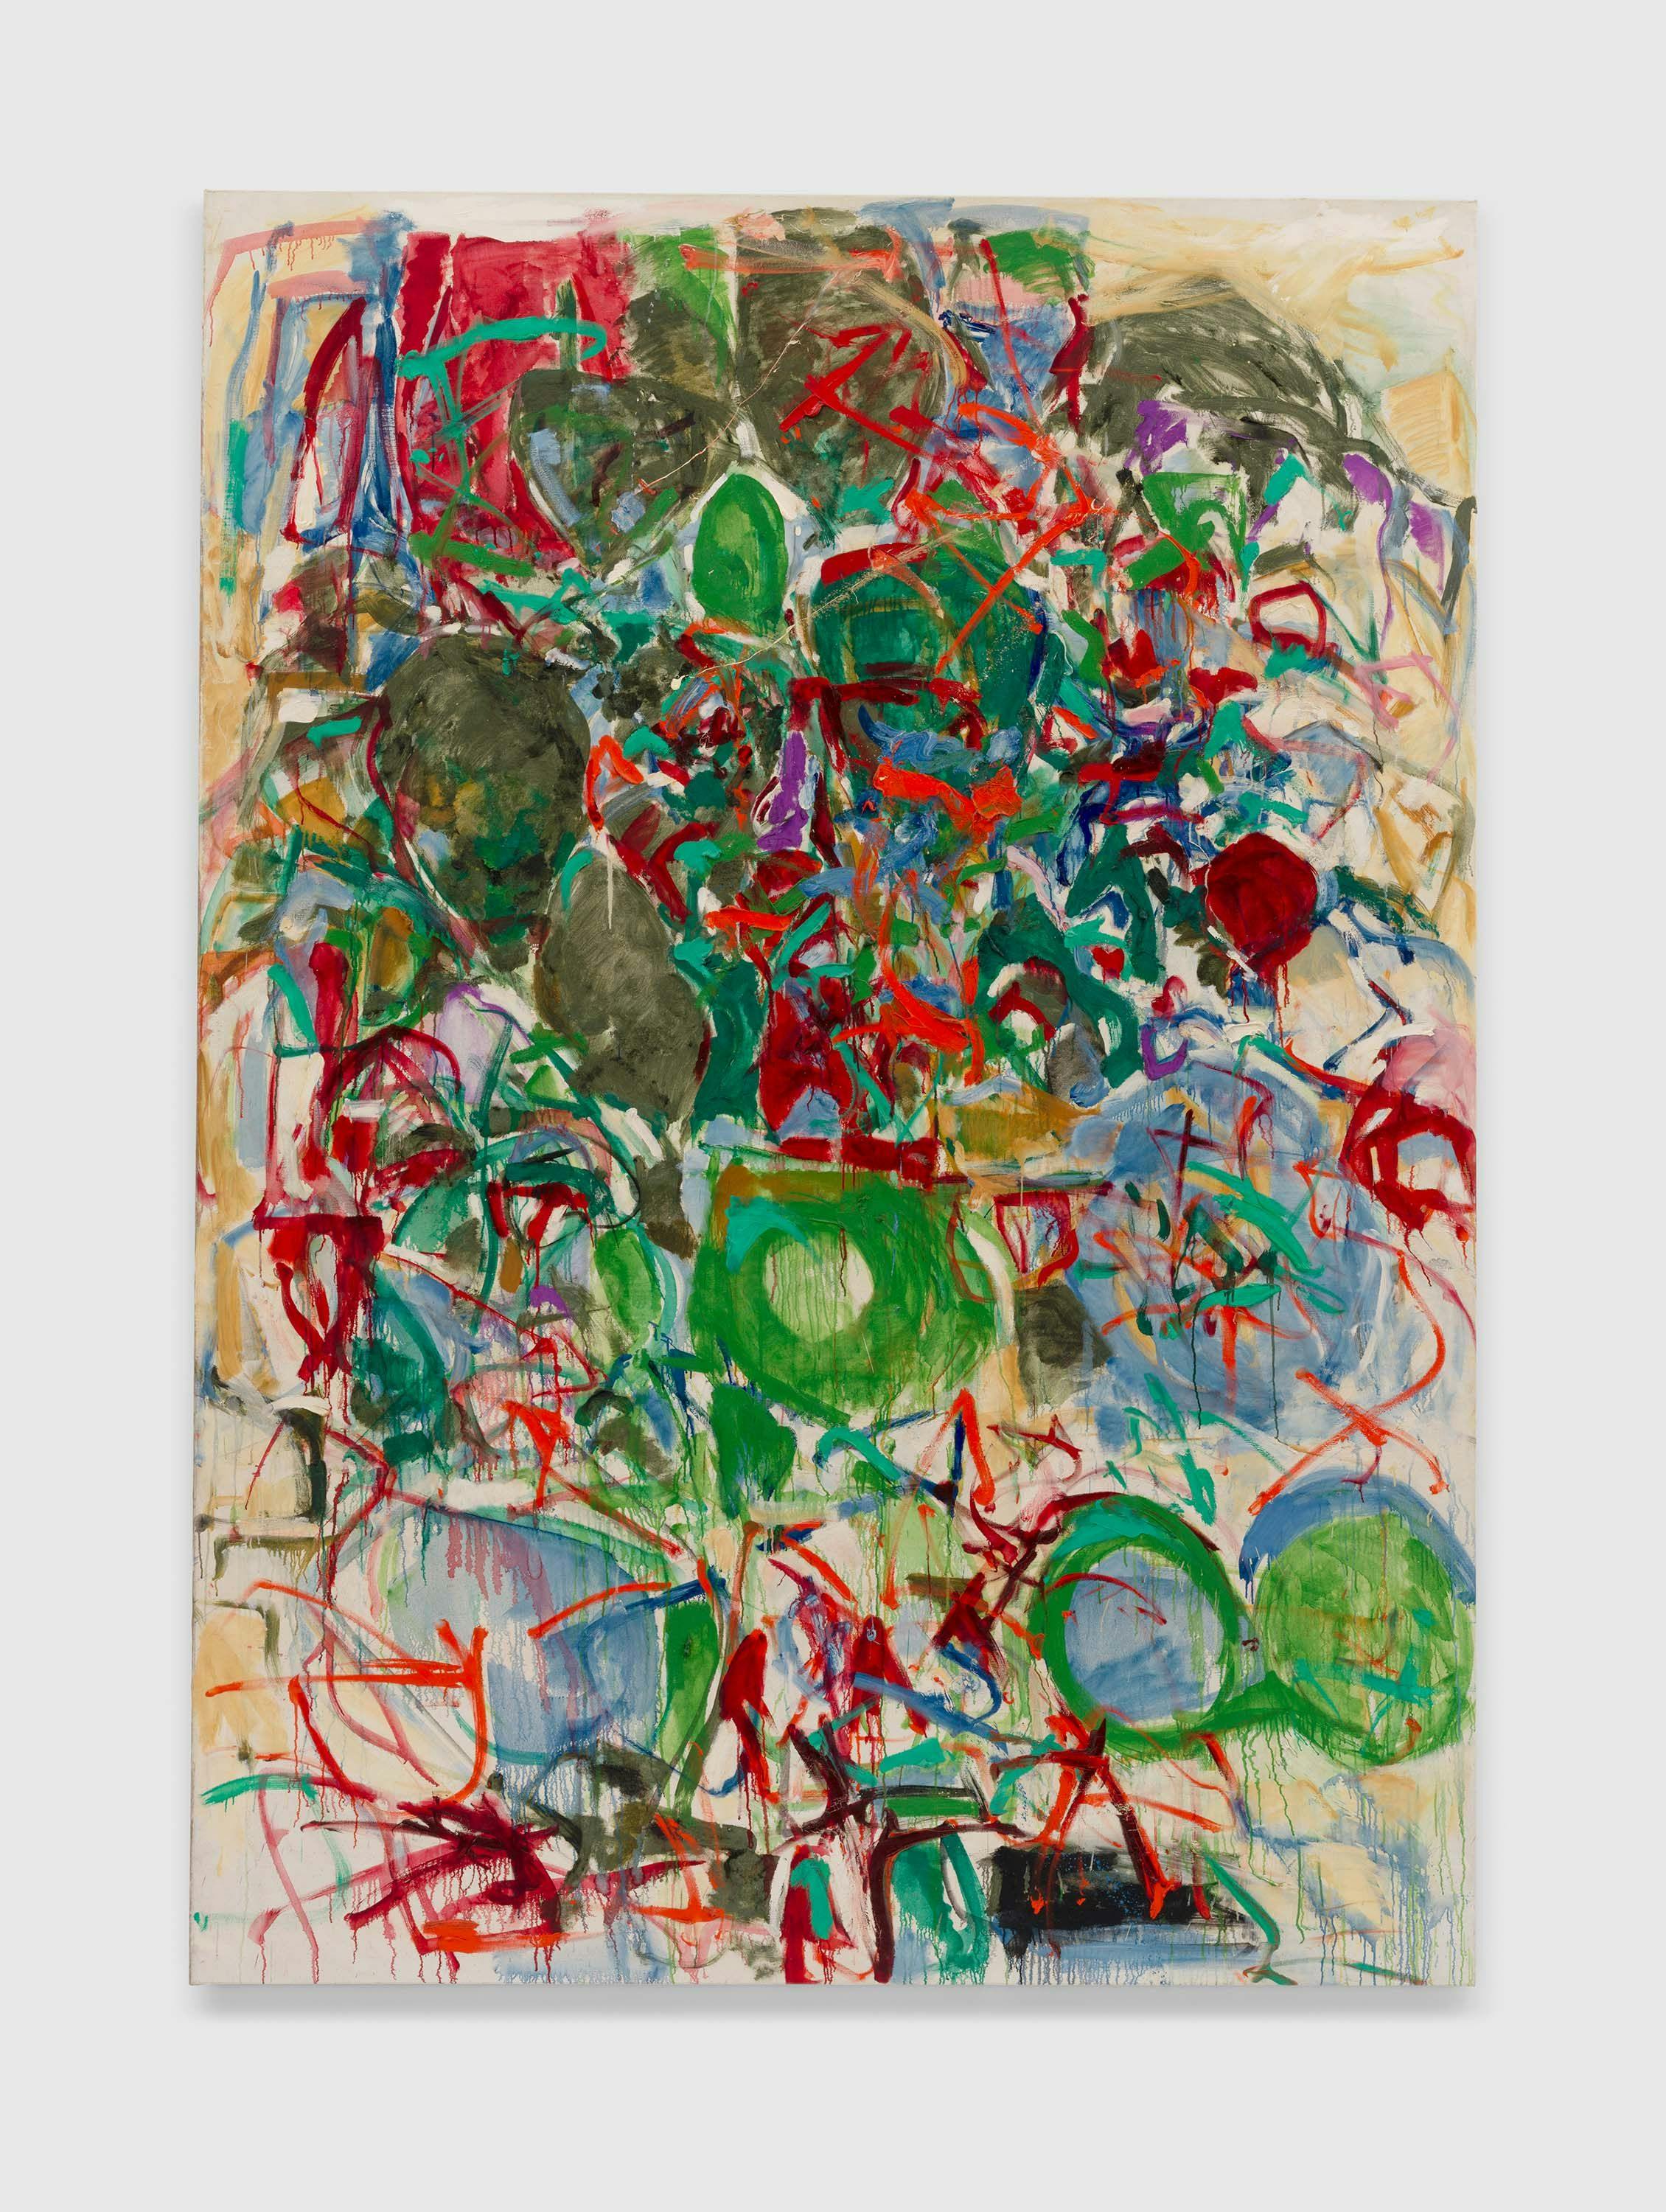 An untitled painting by Joan Mitchell, dated circa 1967.